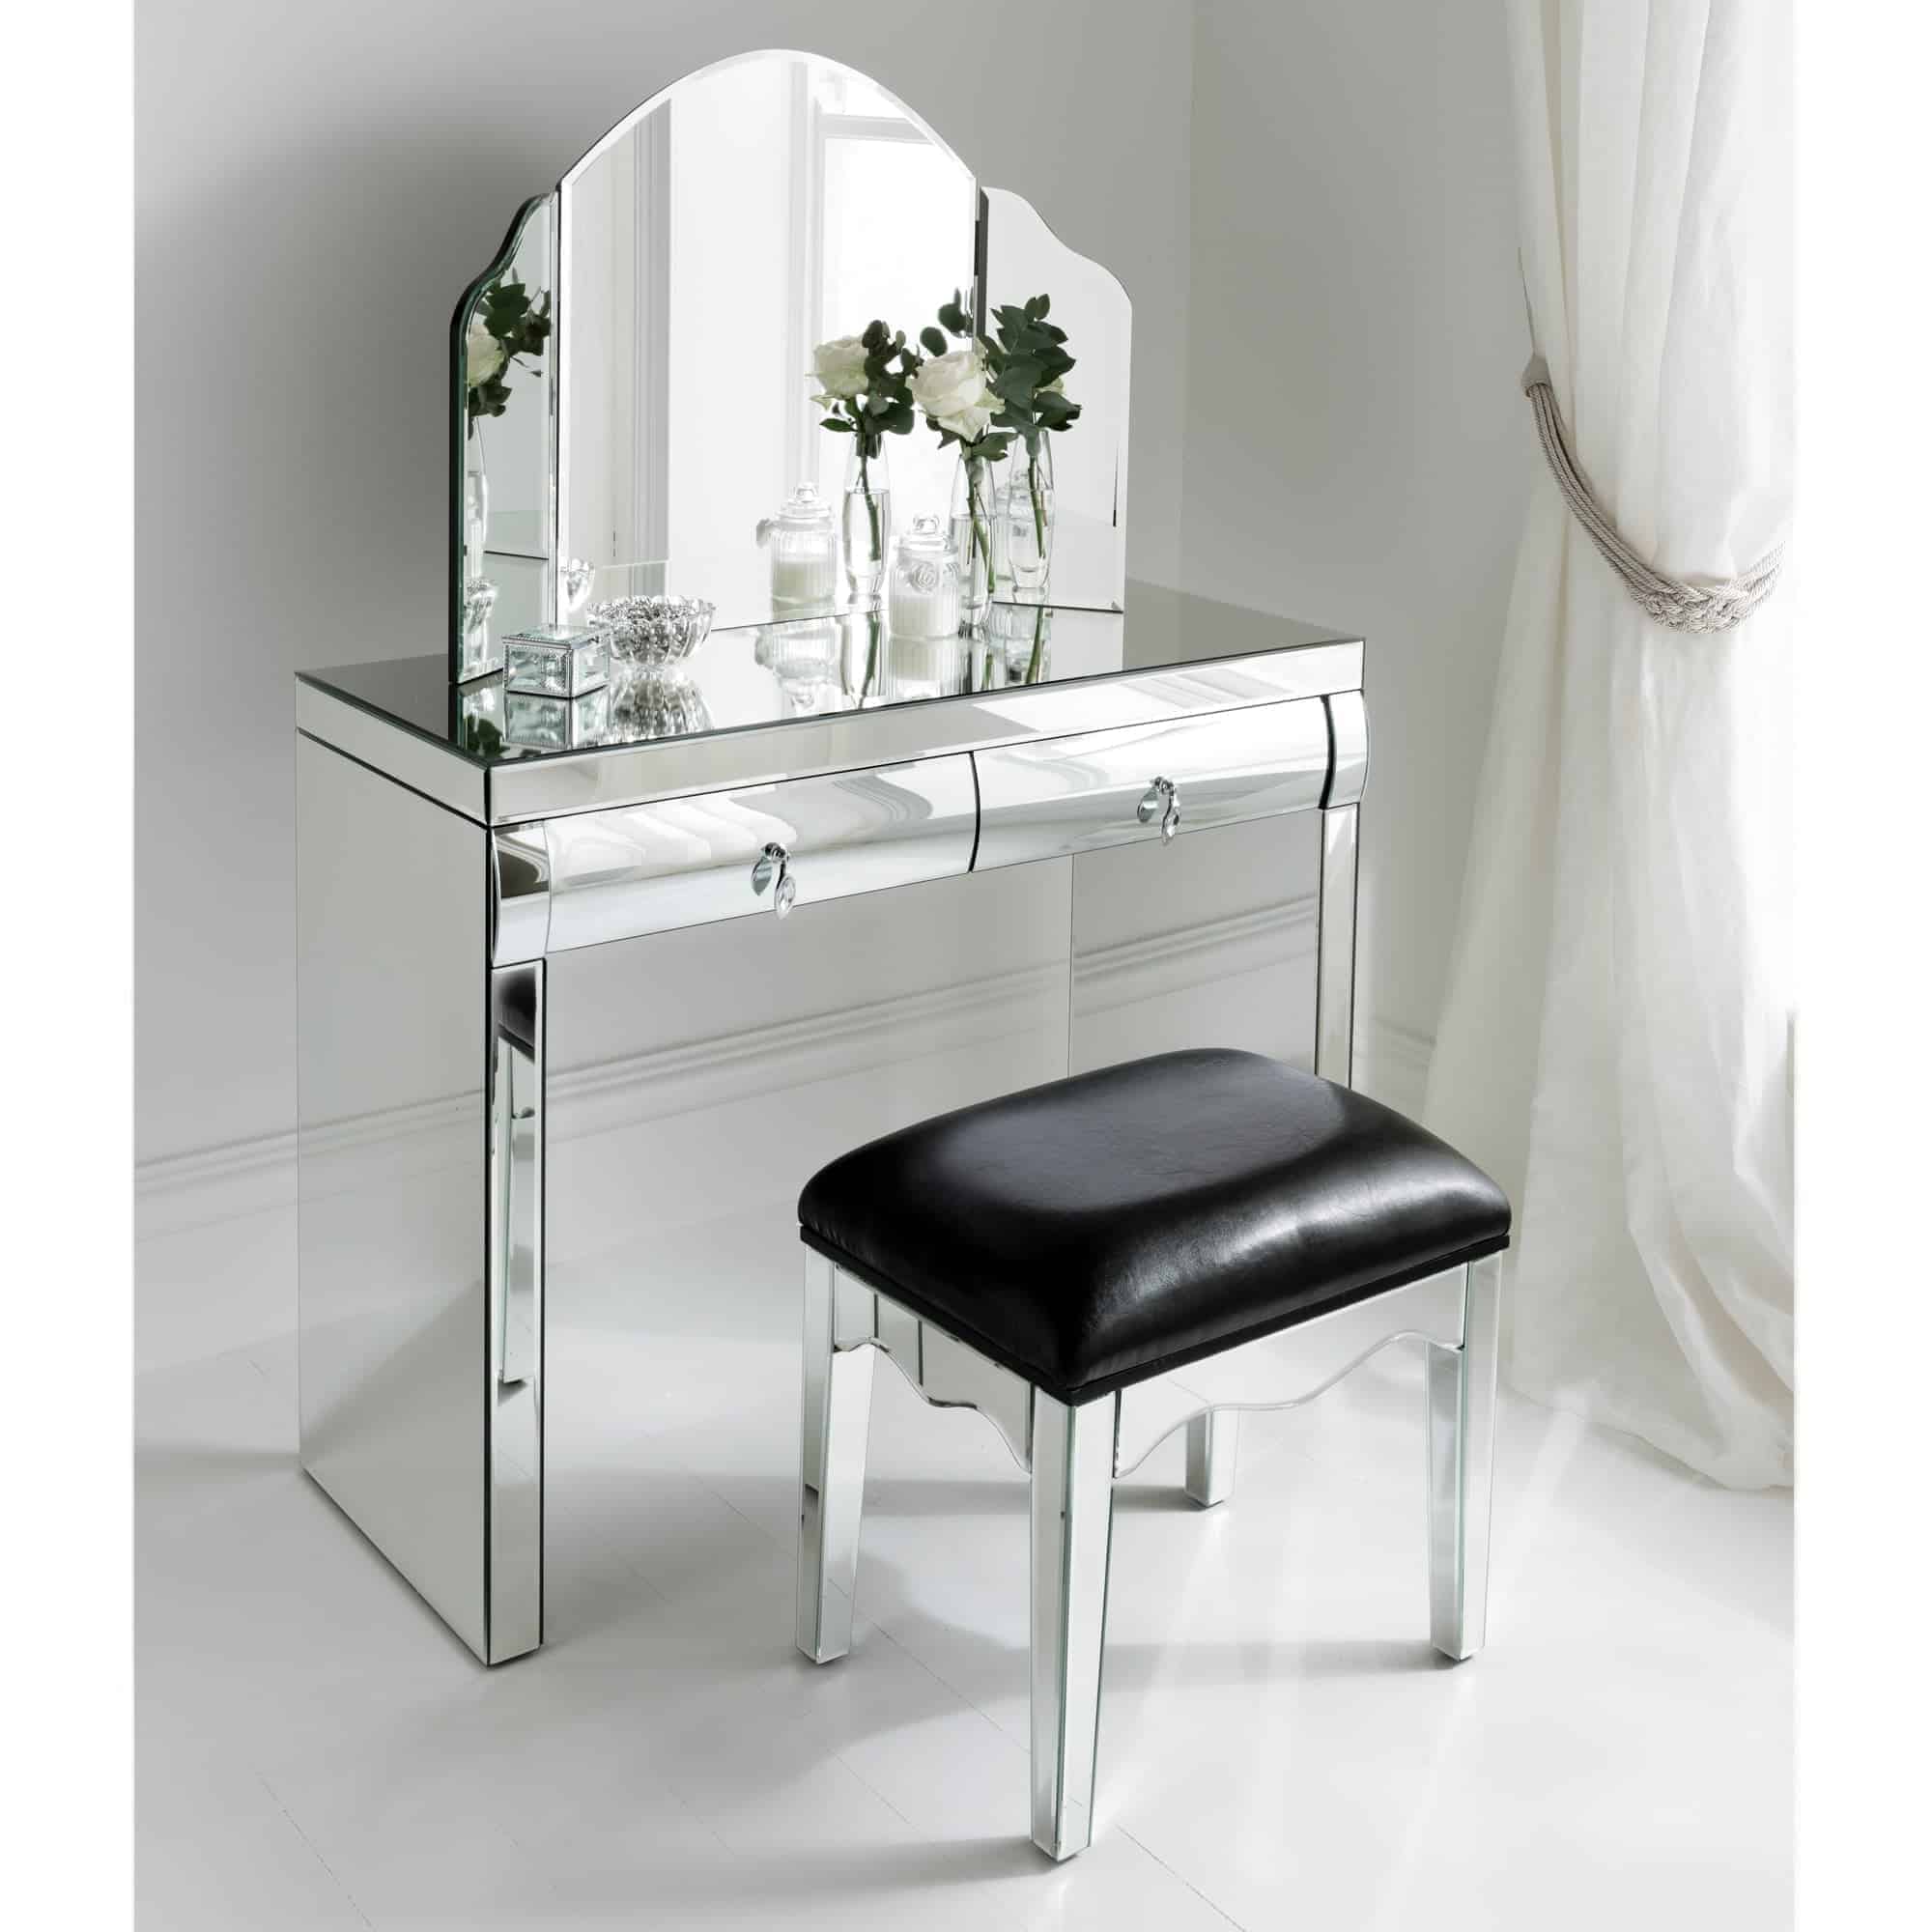 A stylish glass dressing table with a matching stool, kept in a white bedroom with no decor.